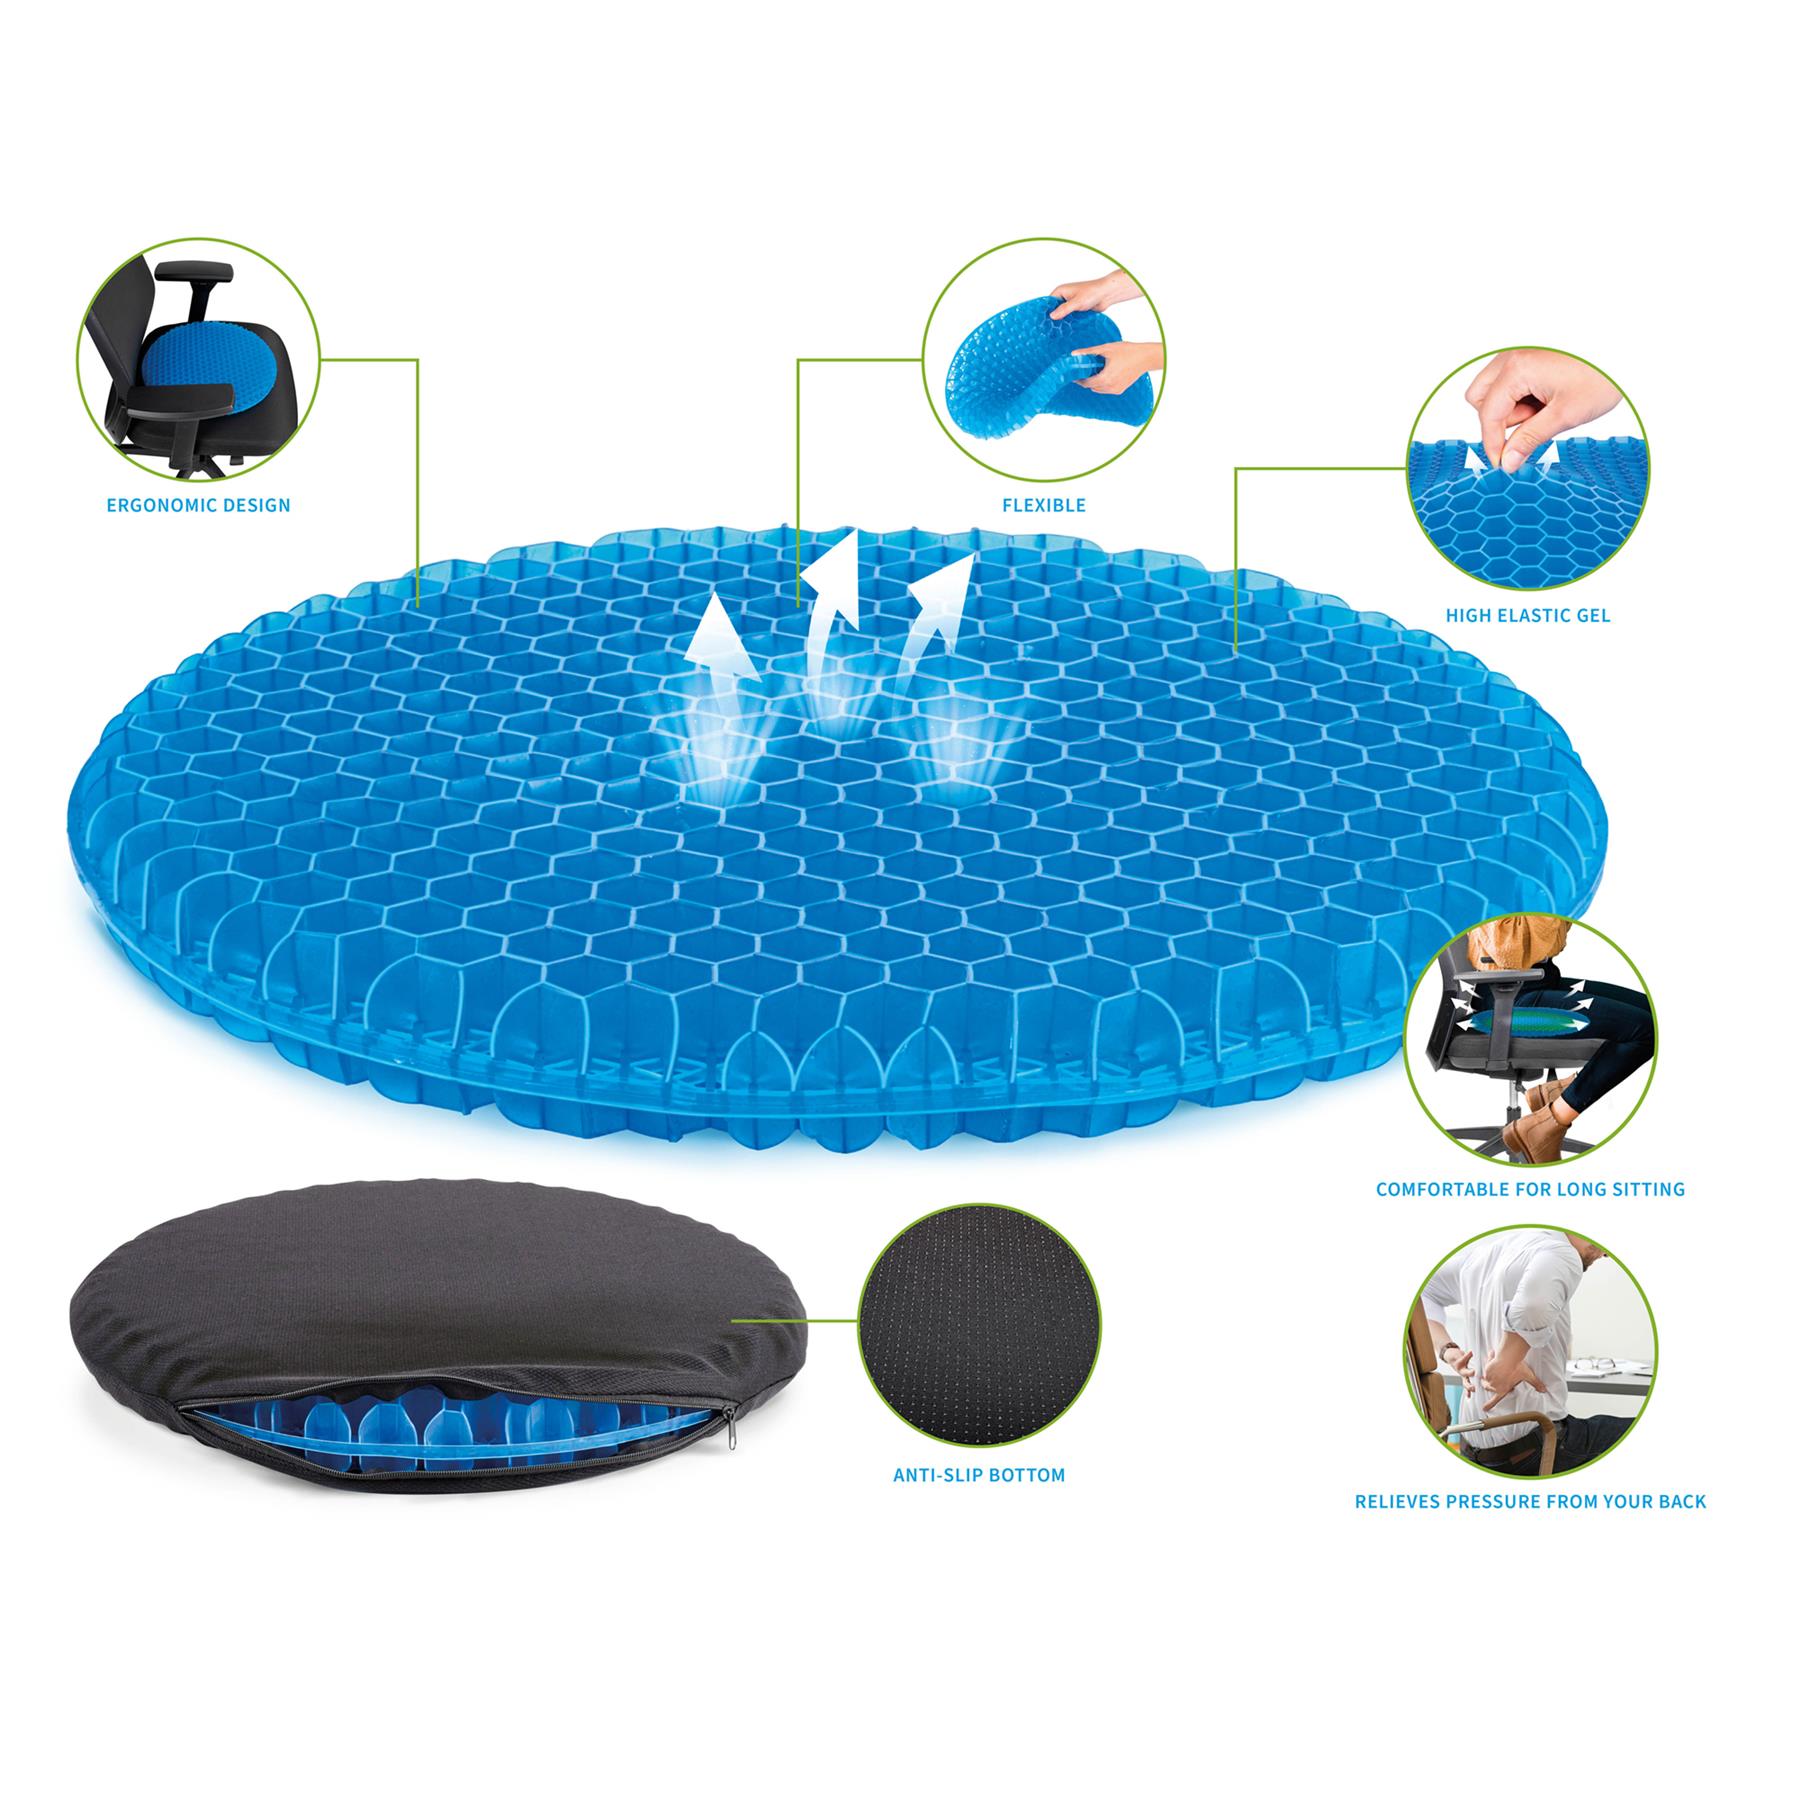 Orthopaedic Gel Seat Pillow by GEEZY - The Magic Toy Shop